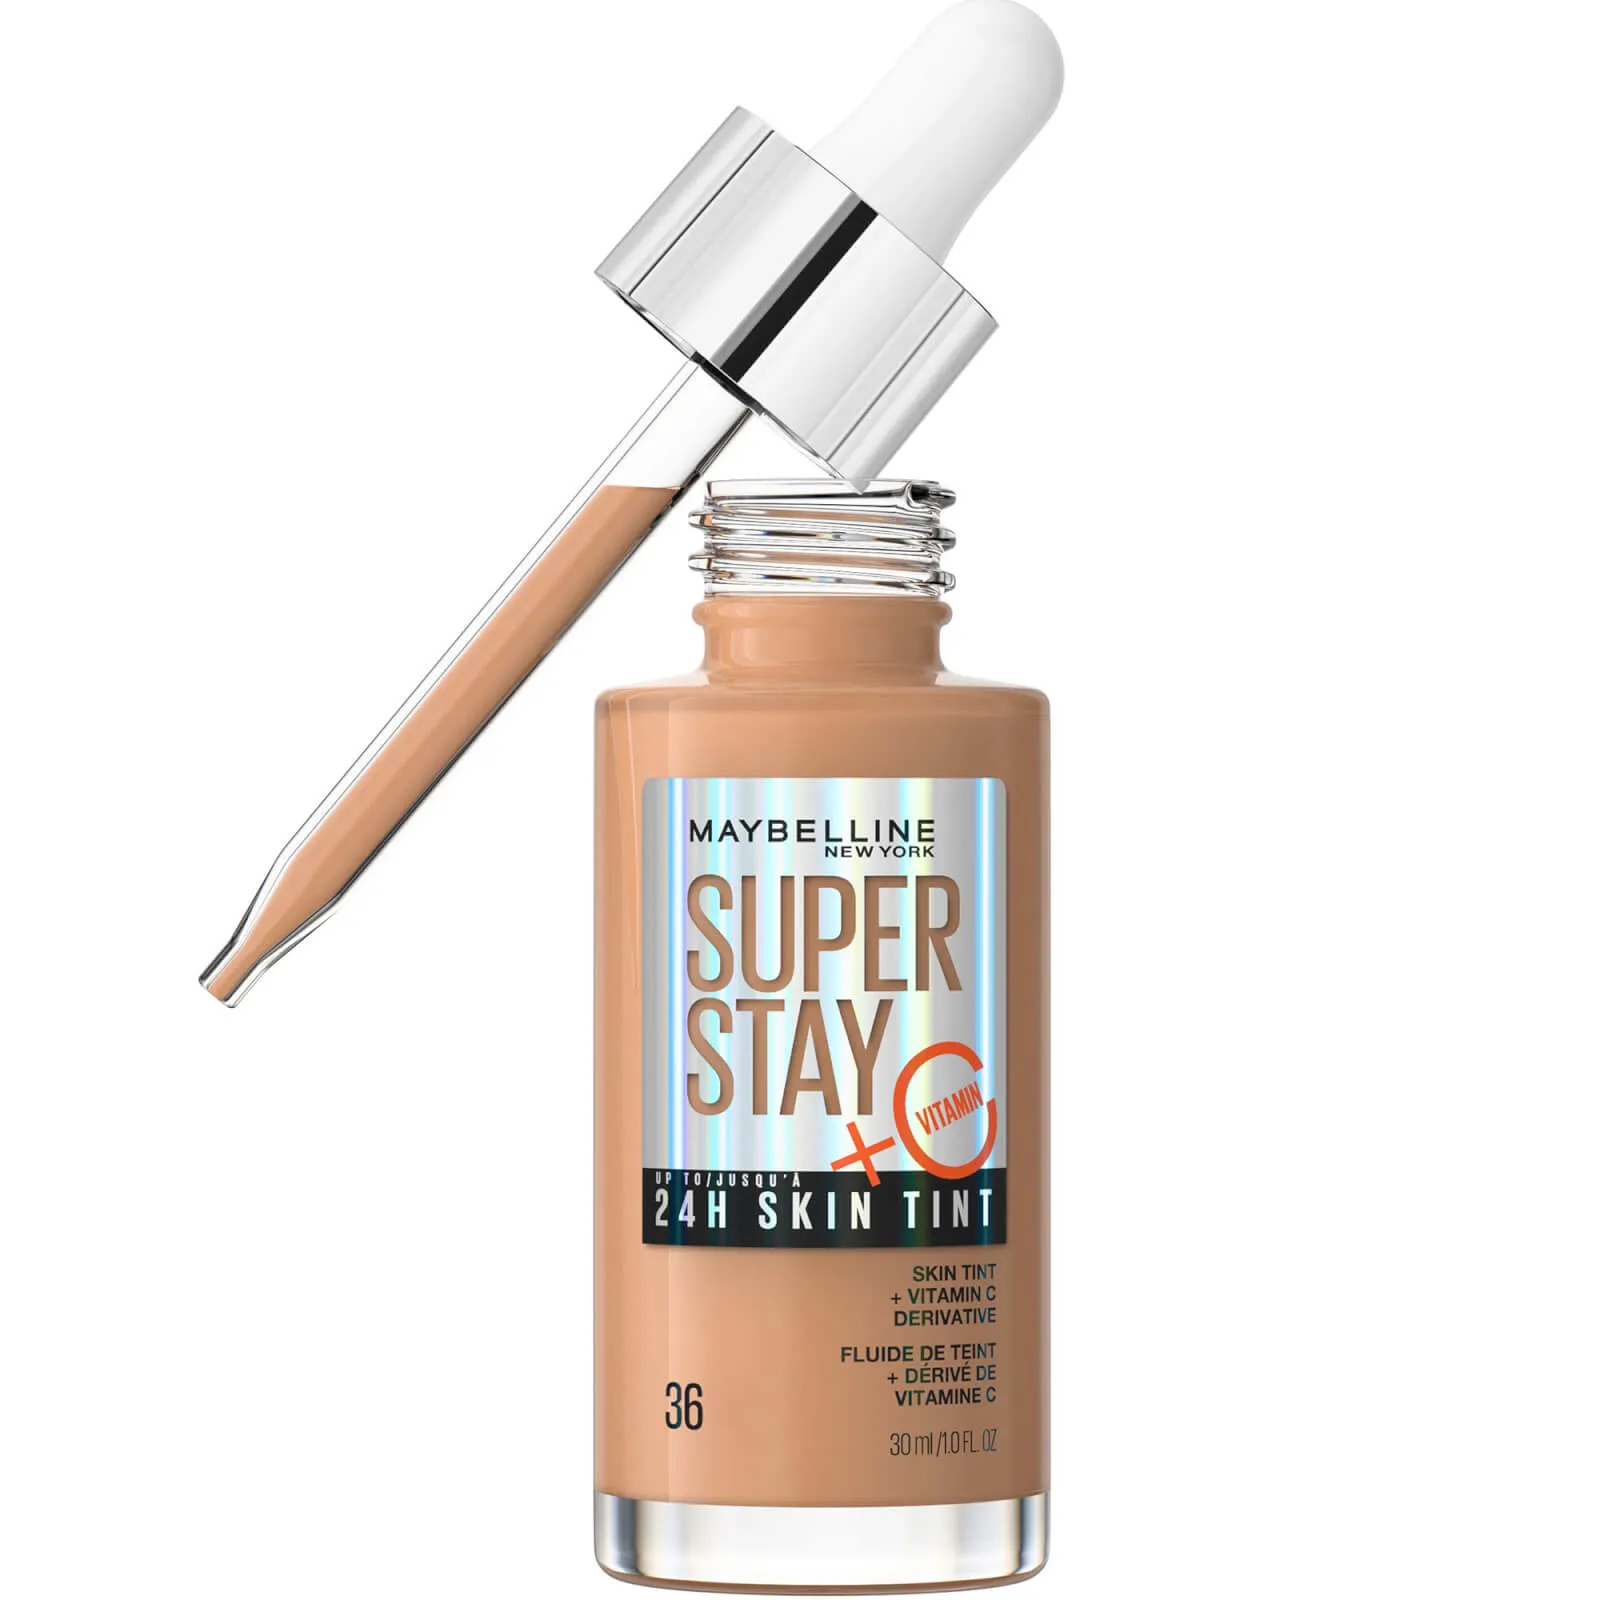  Super Stay up to 24H Skin Tint Foundation + Vitamin C 30ml (Various Shades) - 36